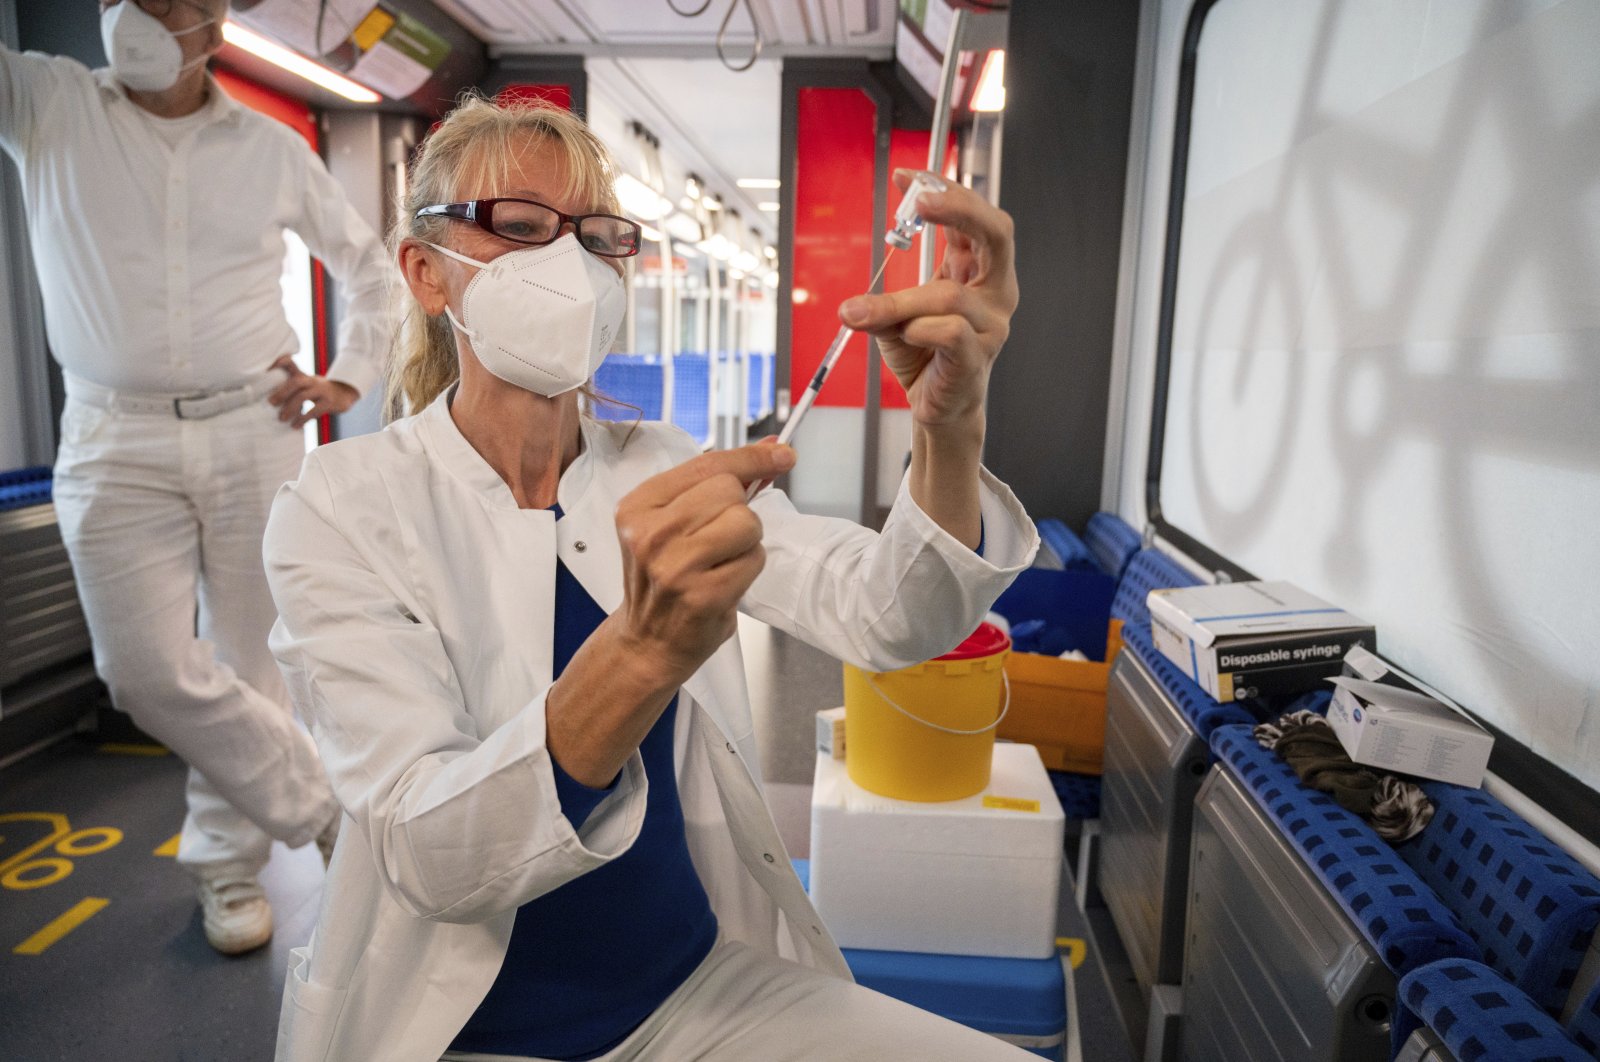 Yvonne Willmann, a railway employee, draws up a syringe with the Johnson & Johnson vaccine in a special train of the public transport organization S-Bahn, in which vaccinations against COVID-19 are offered, Berlin, Germany, Aug. 30, 2021. (AP Photo)